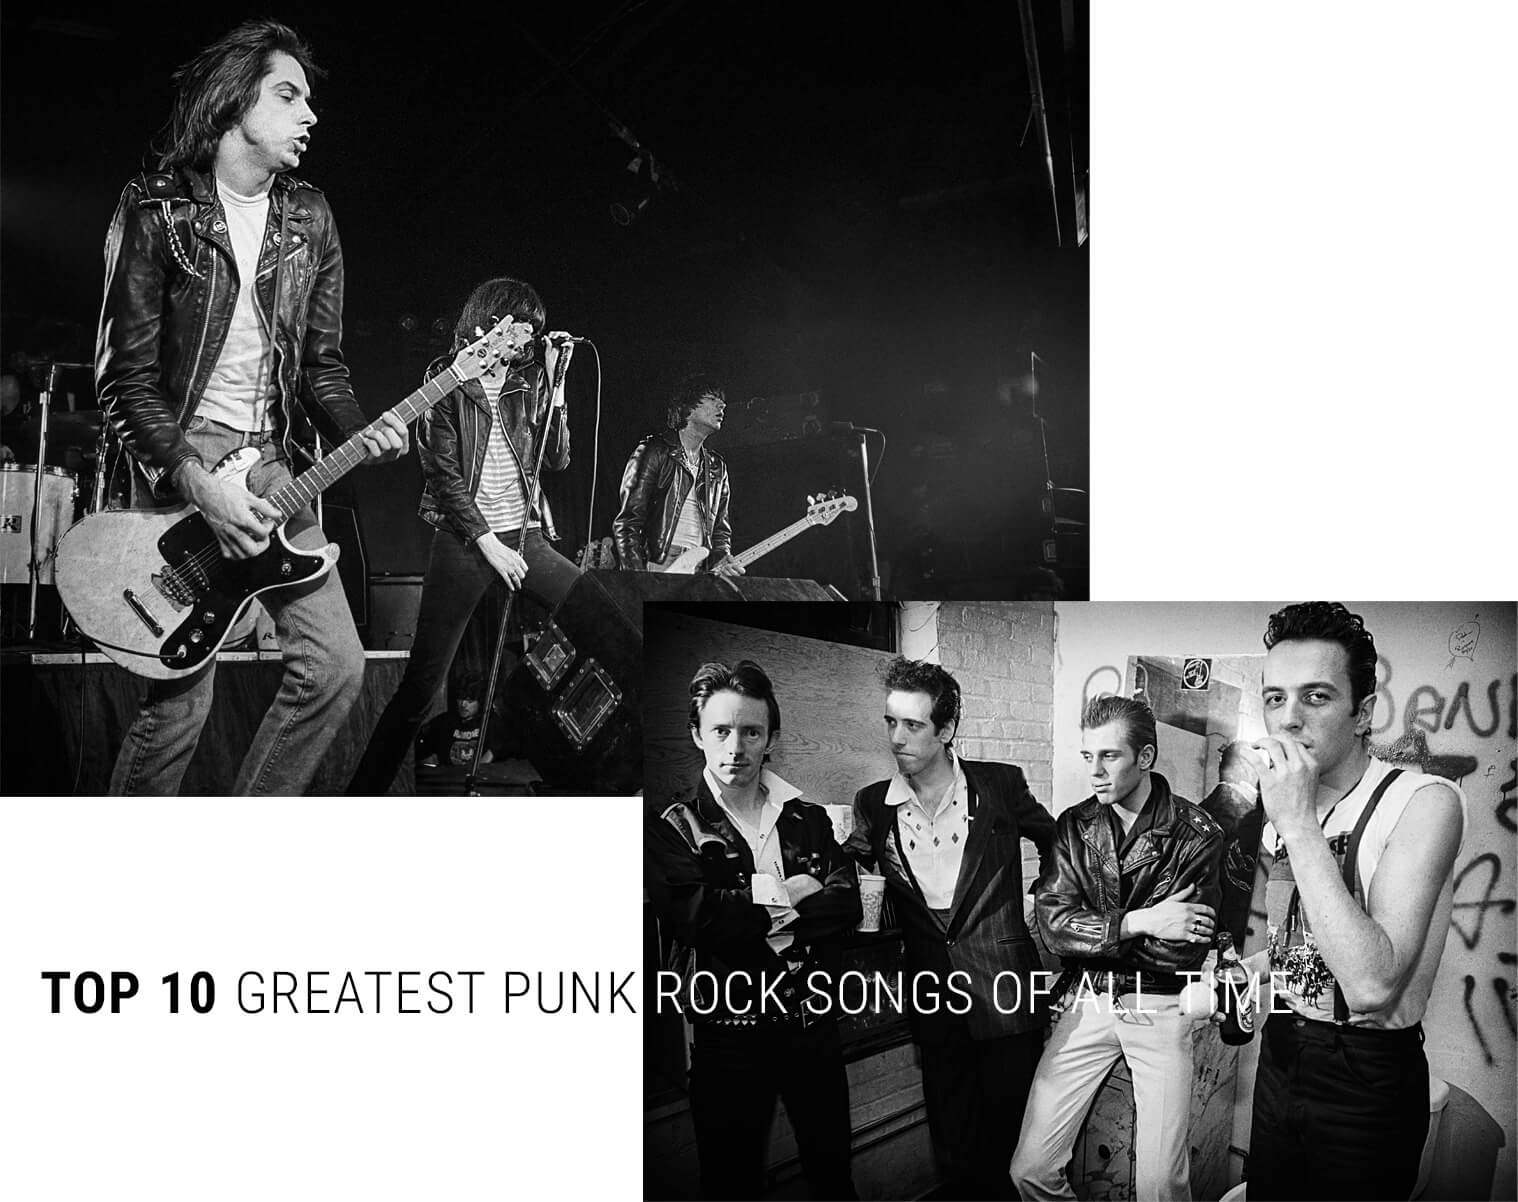 Top 10 Greatest Punk Rock Songs of All Time » Days of Punk